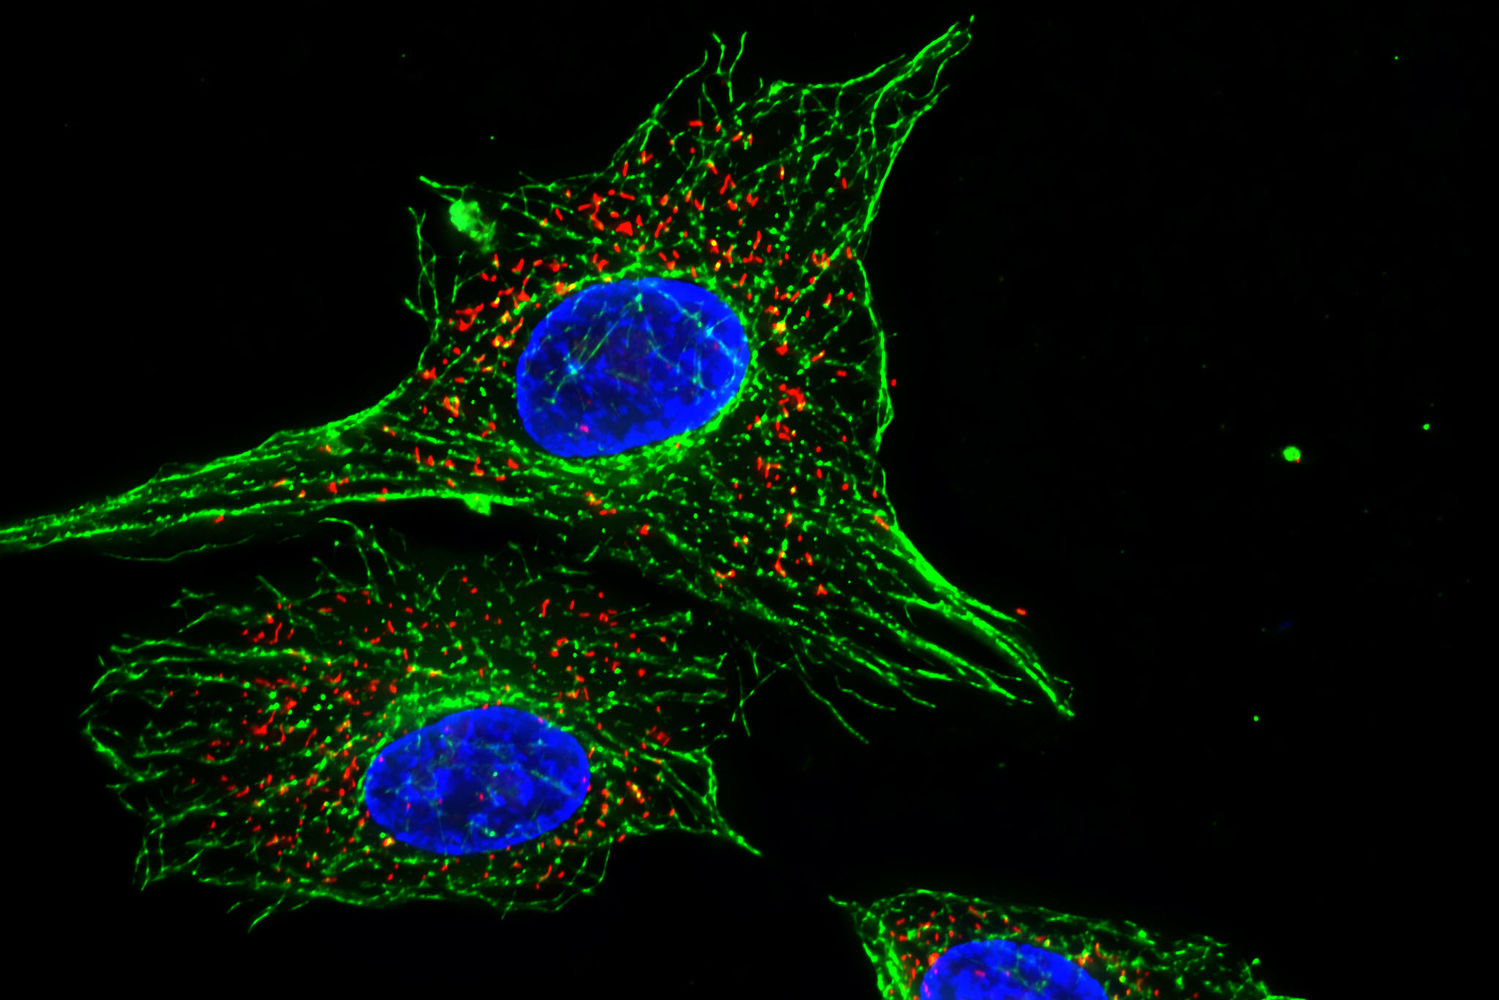 Fluorescently labelled cell via Leica